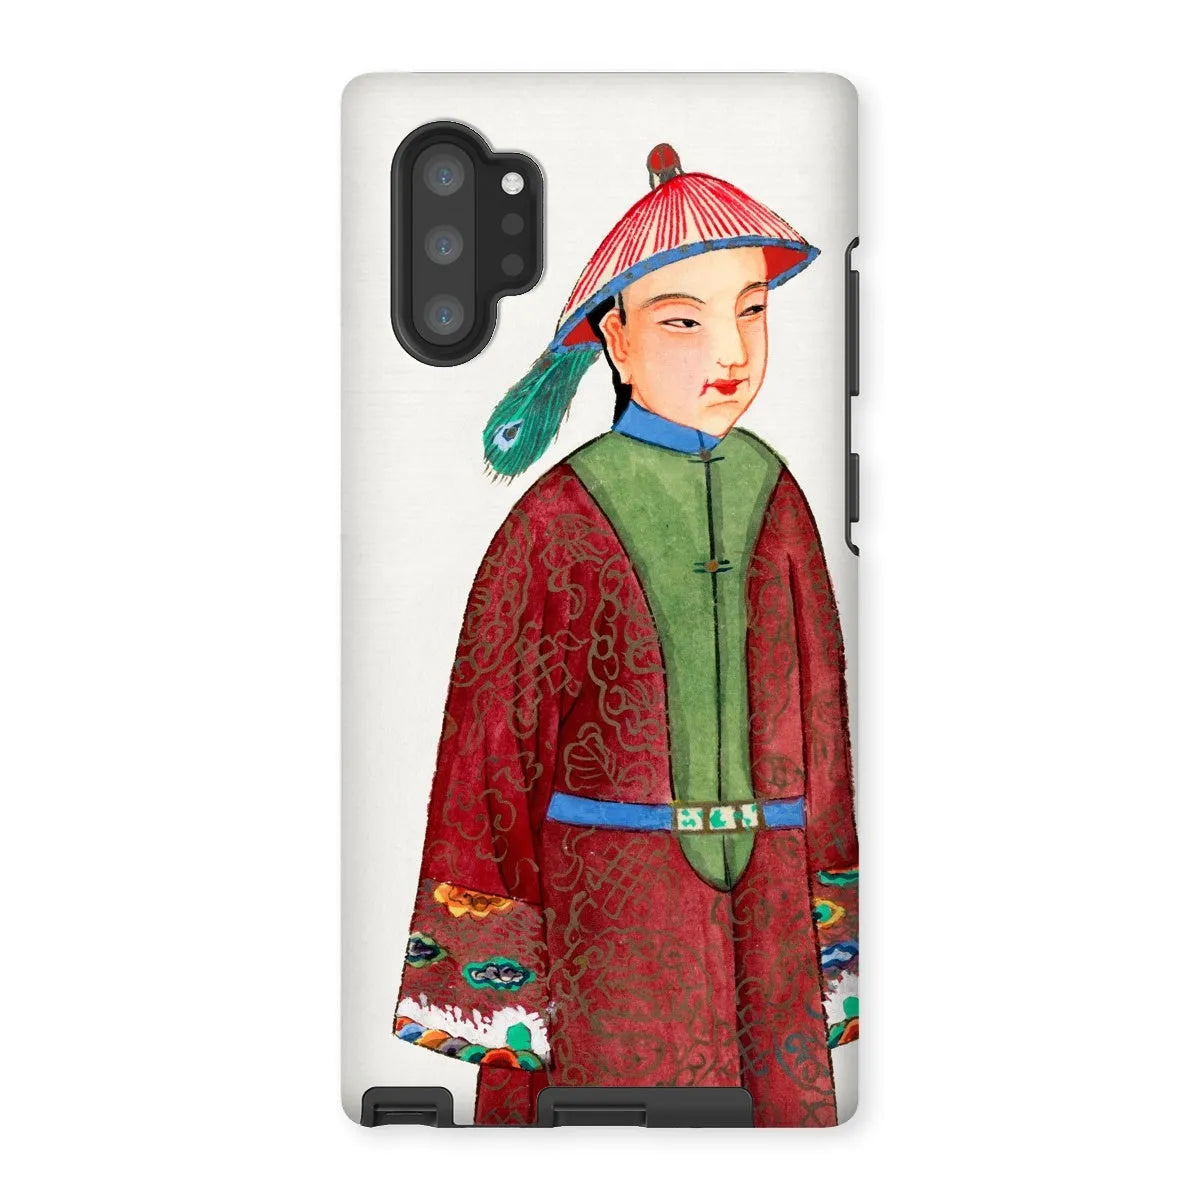 Manchu Dandy - Chinese Aesthetic Art Phone Case - Samsung Galaxy Note 10p / Matte - Mobile Phone Cases - Aesthetic Art